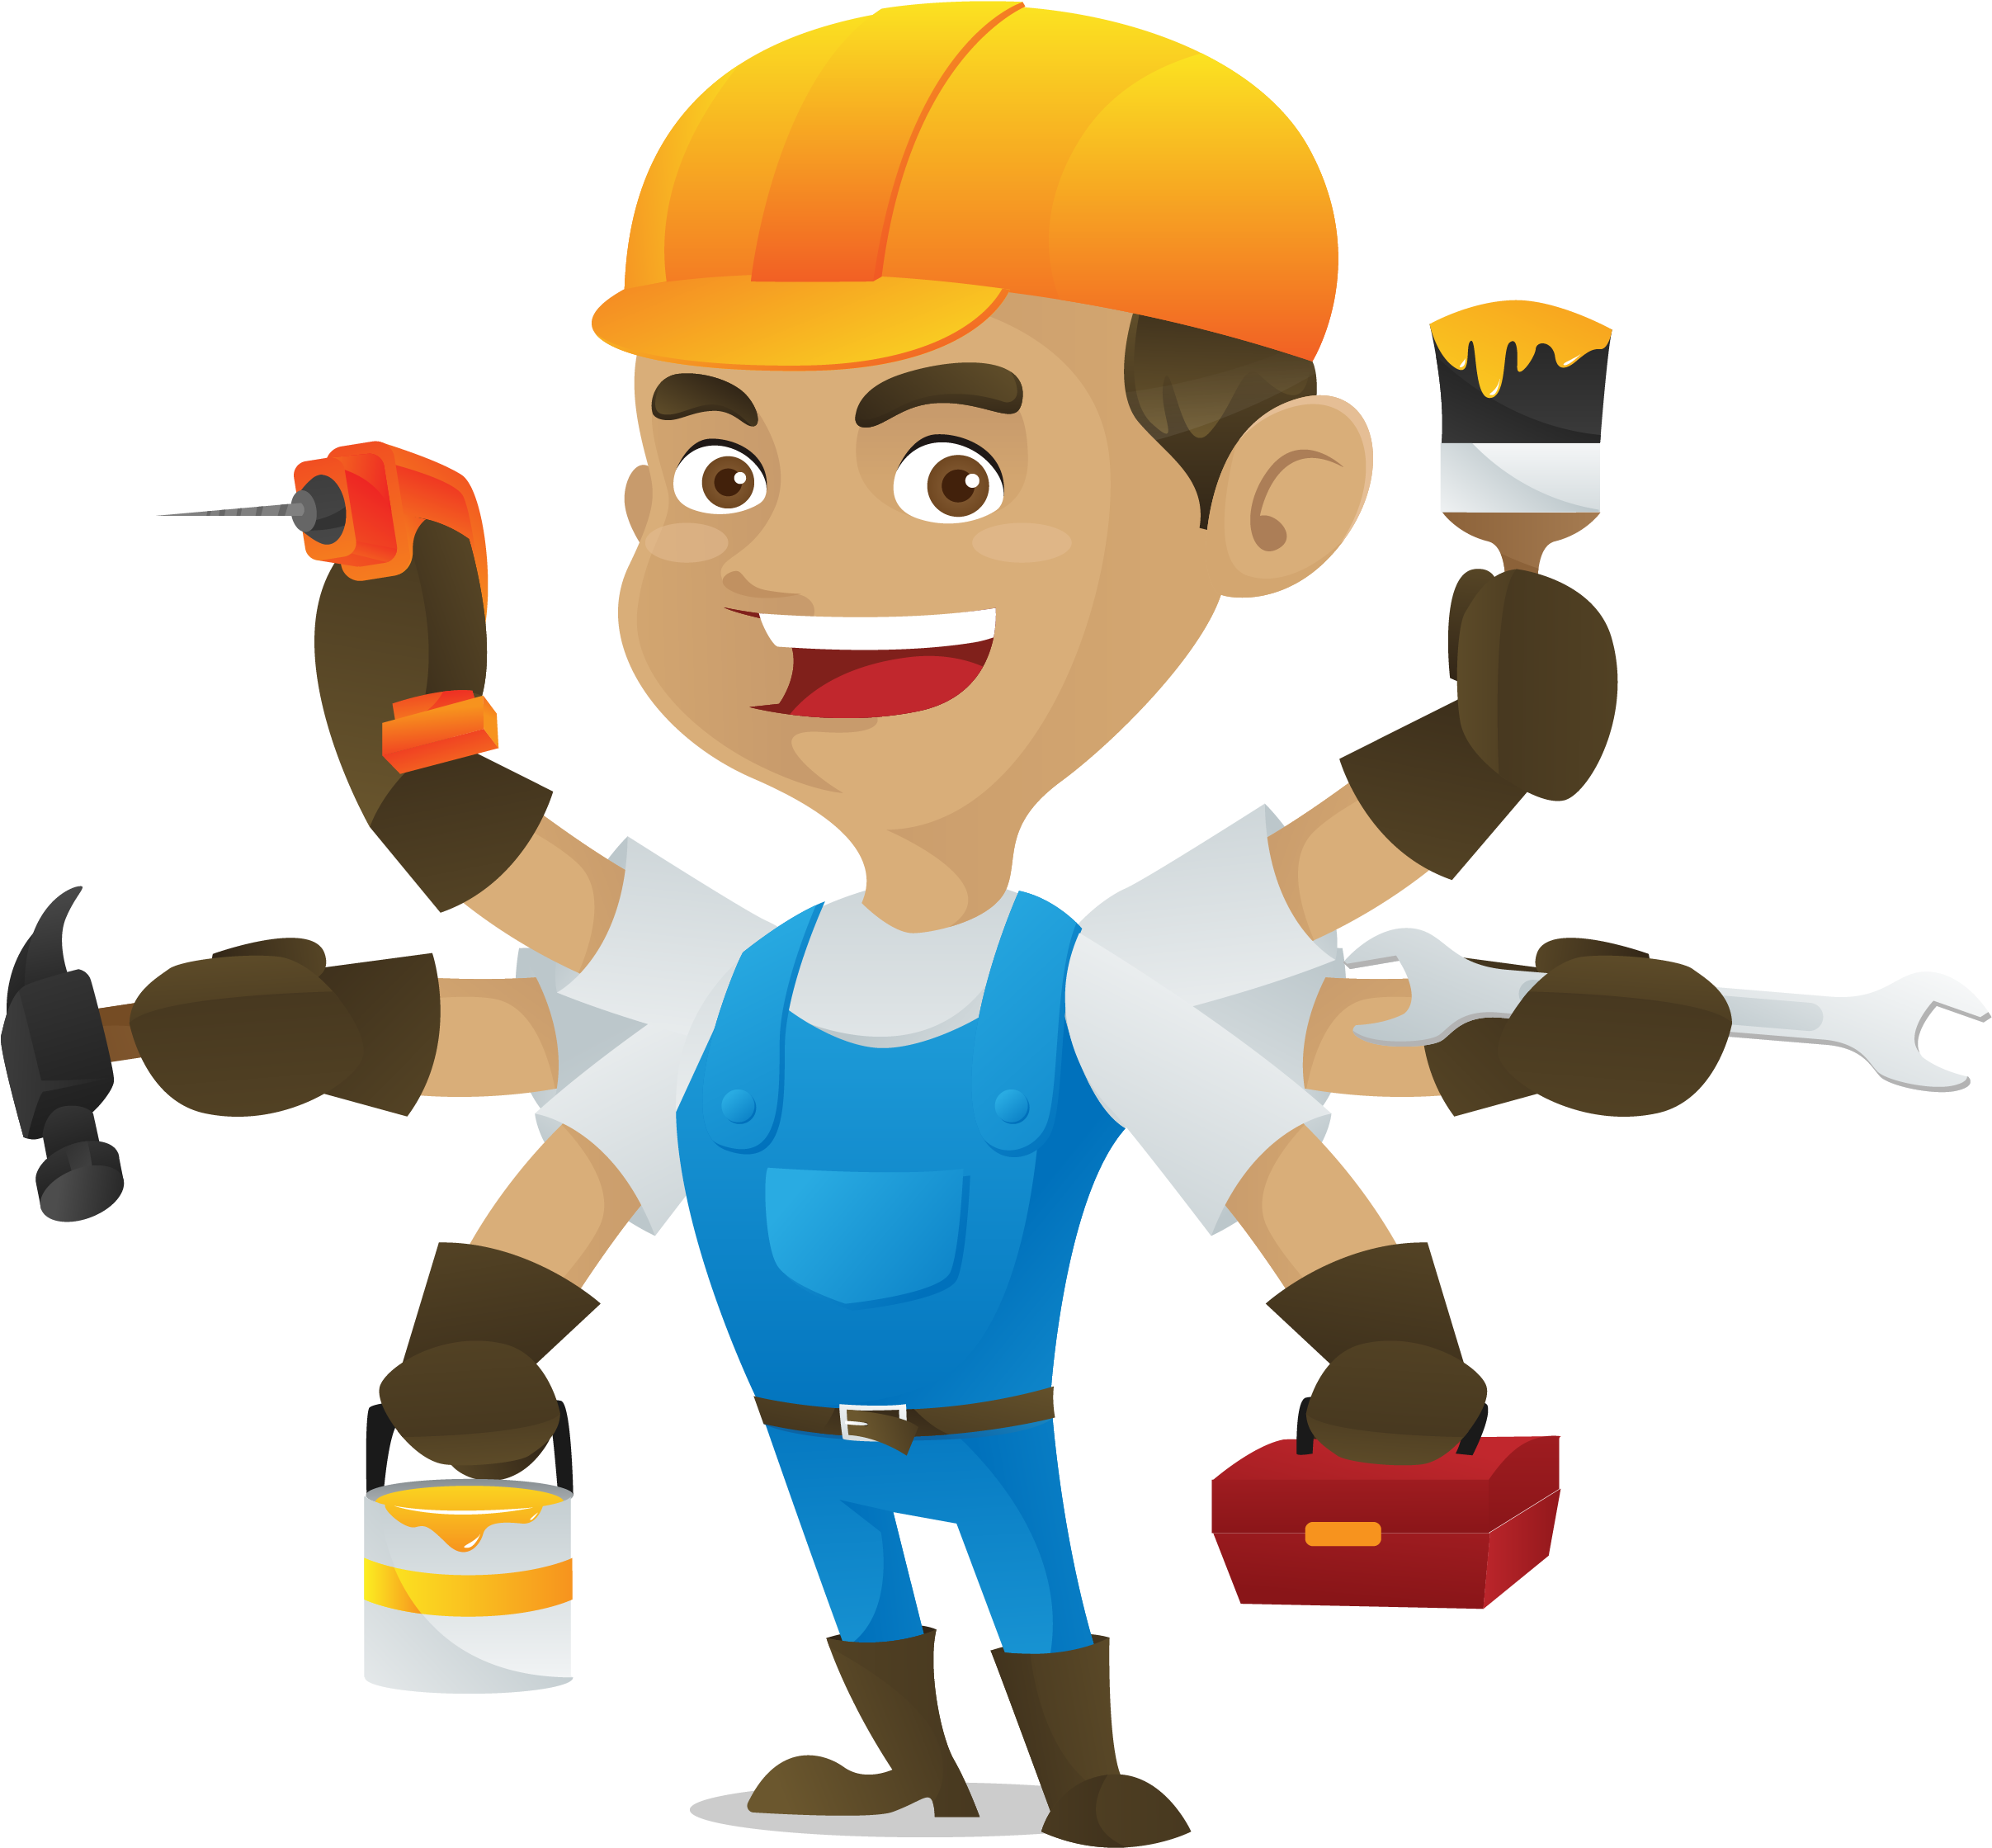 A Cartoon Of A Man With Many Arms Holding Tools